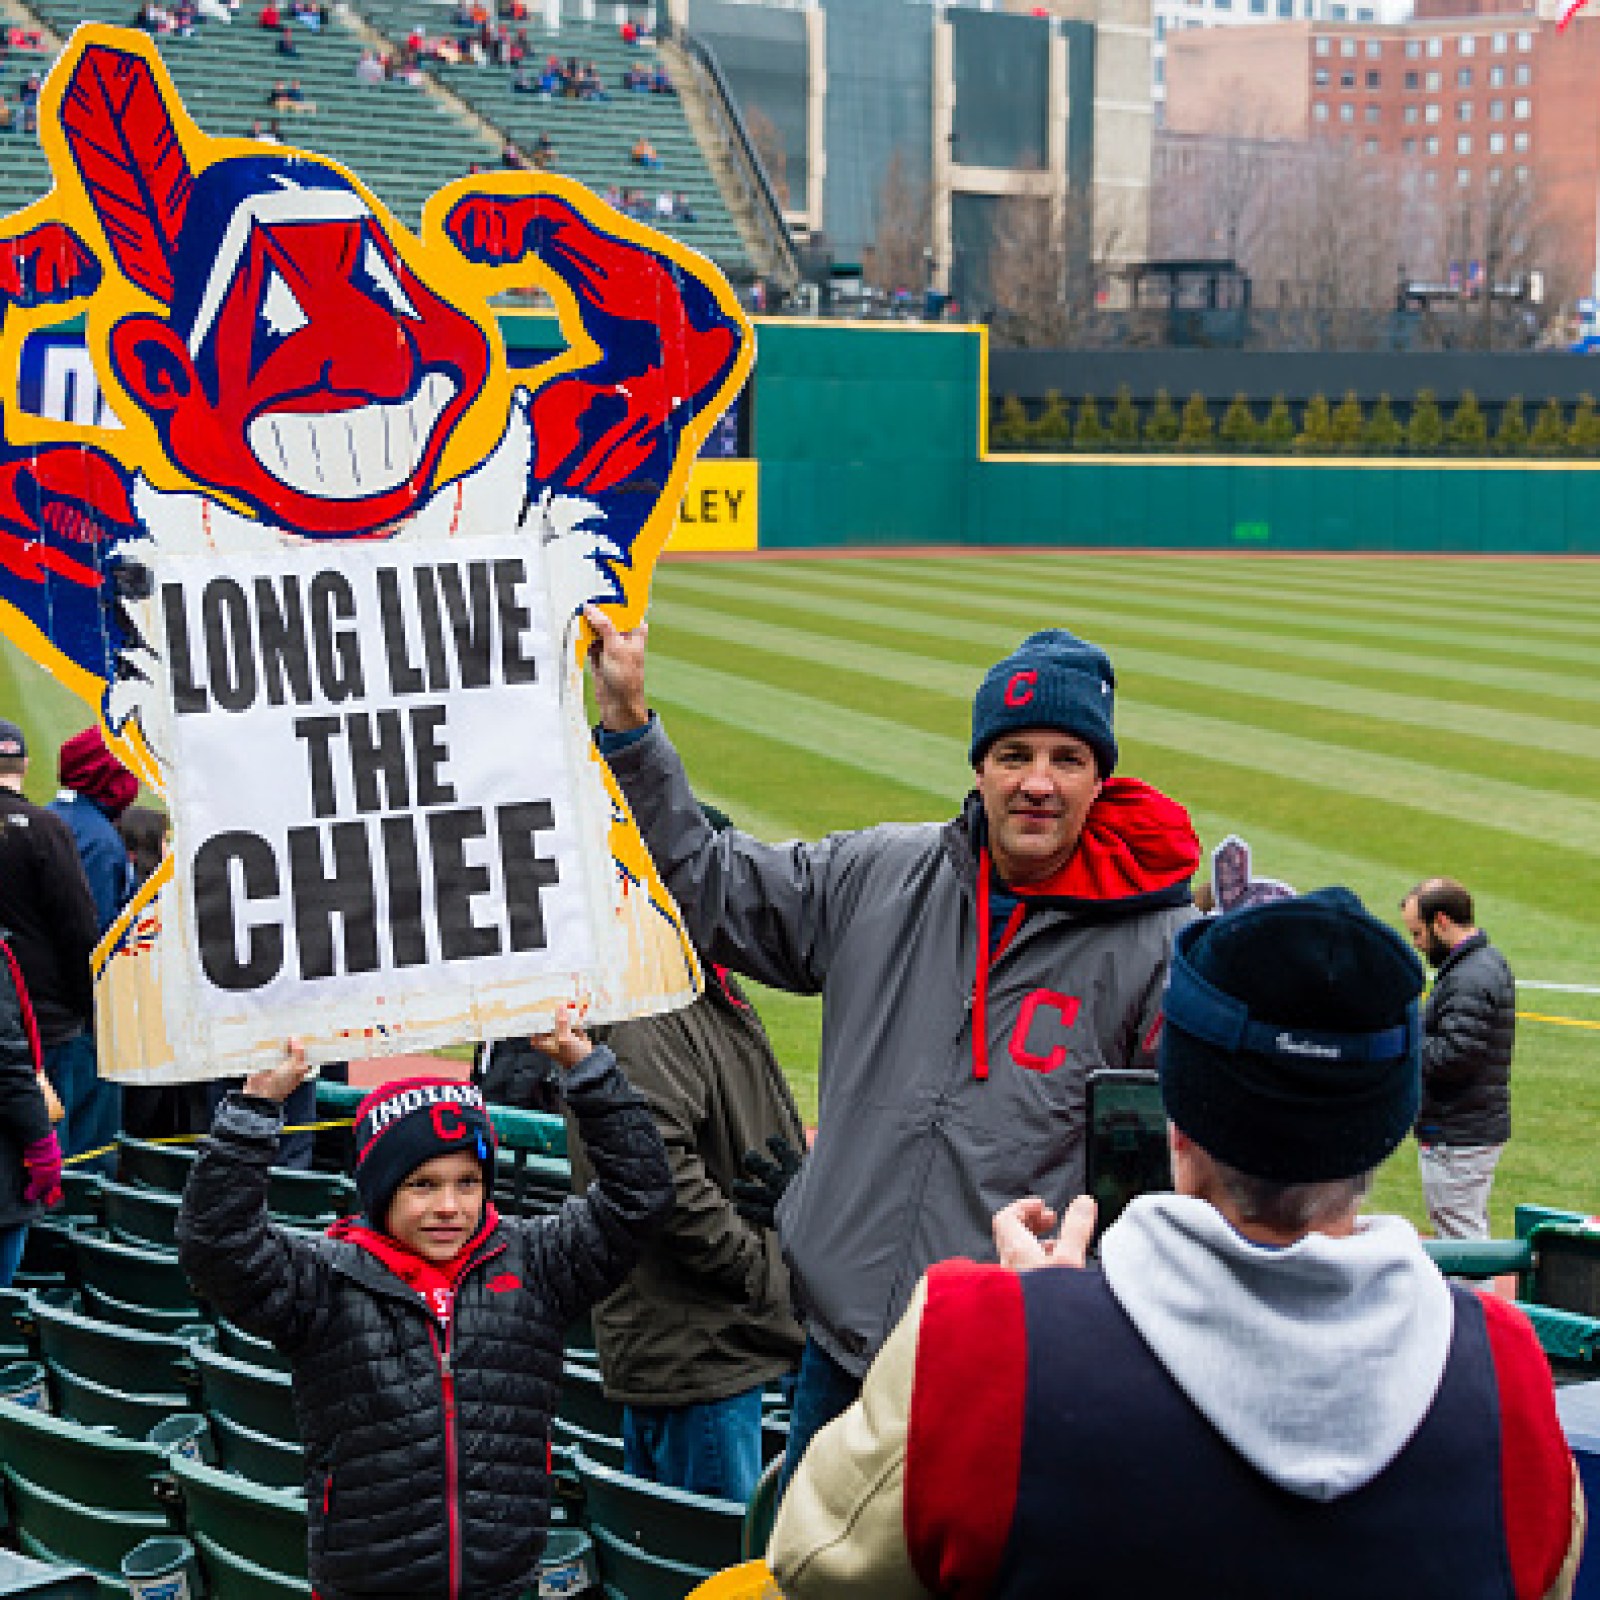 Cleveland Indians to drop 'Indians' from its name, though not immediately